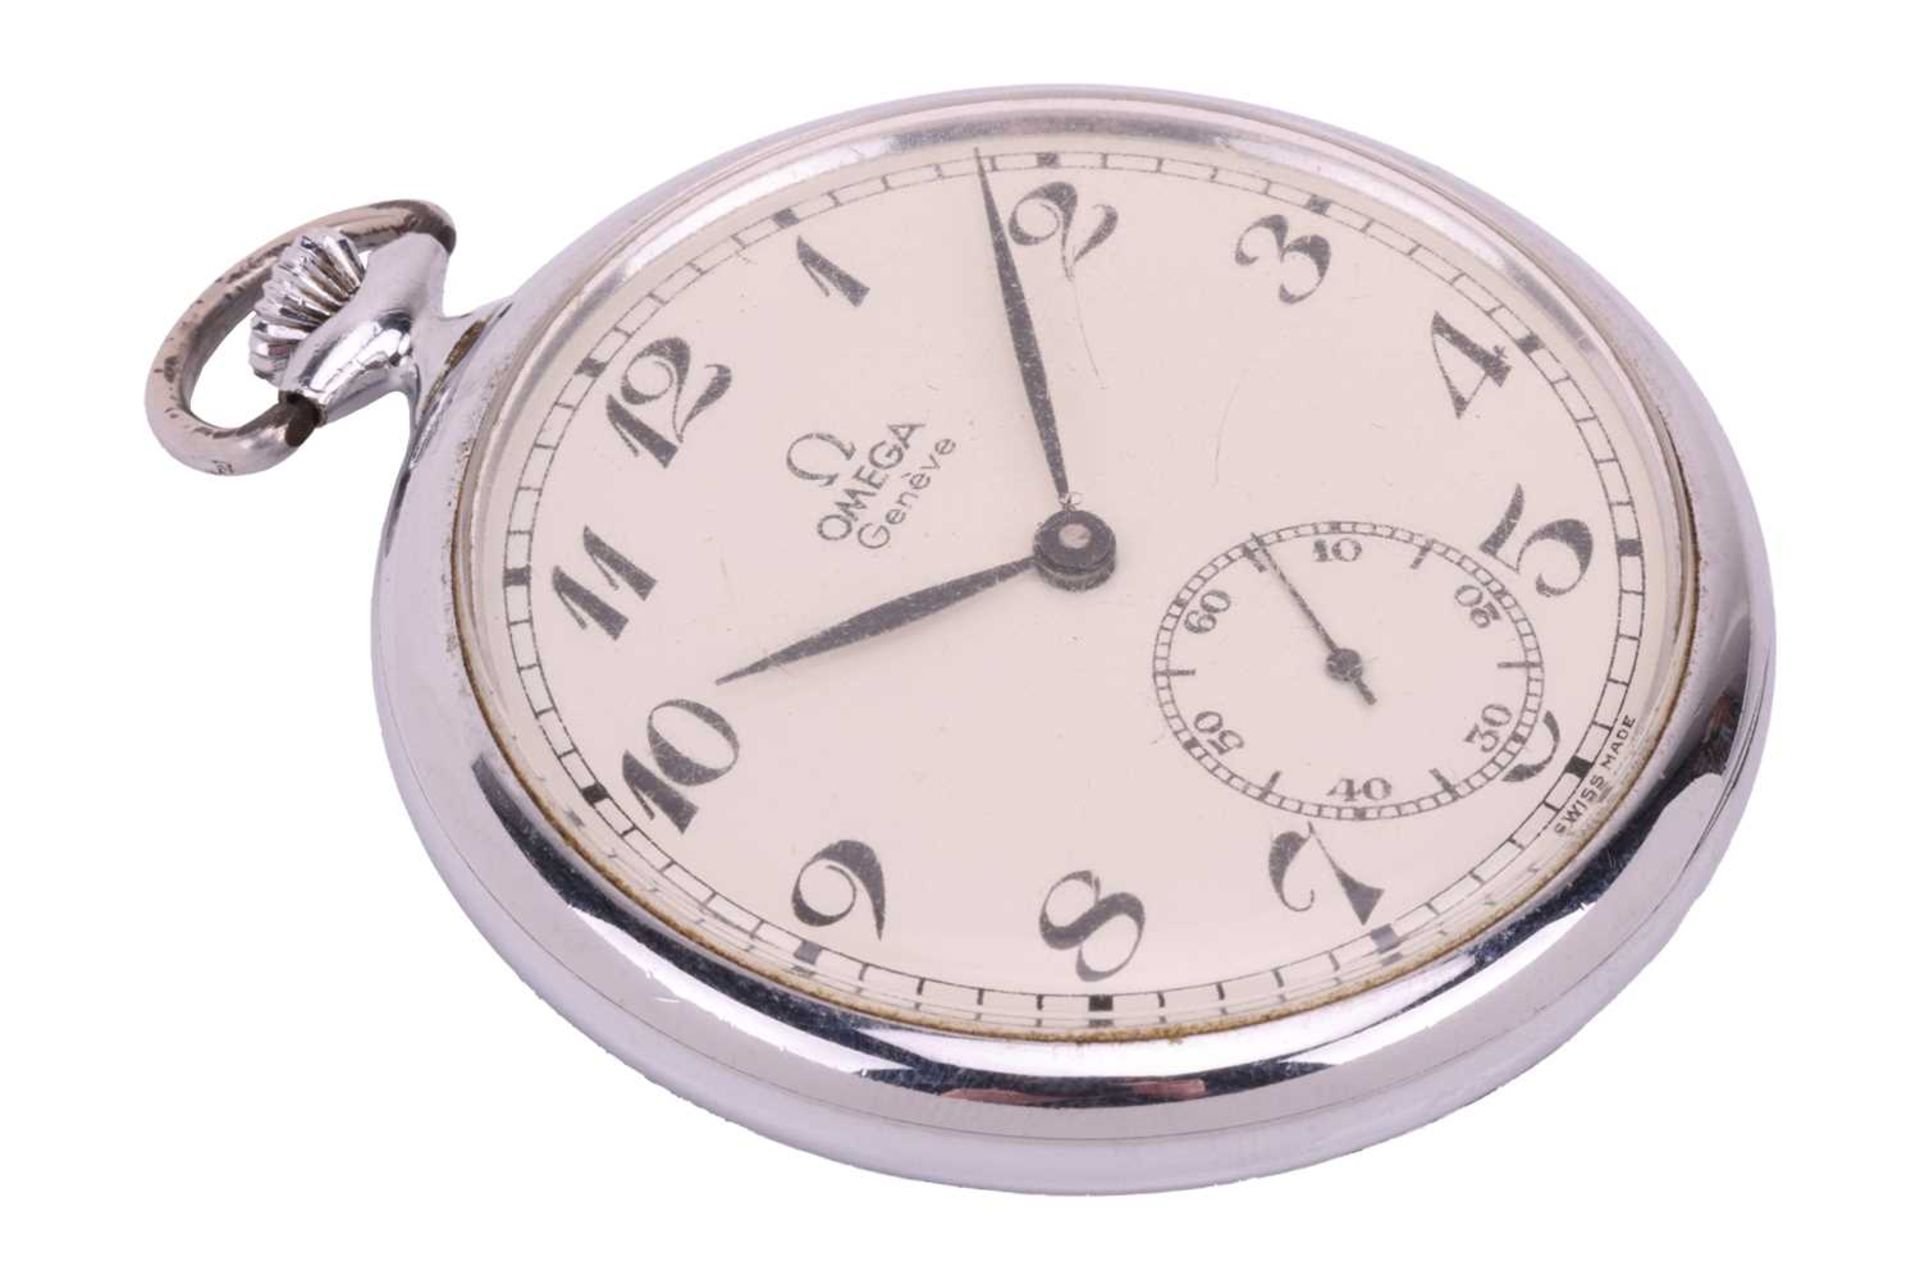 An Omega open-face pocket watch, featuring a keyless wound movement calibre 960 in a steel case - Image 3 of 4